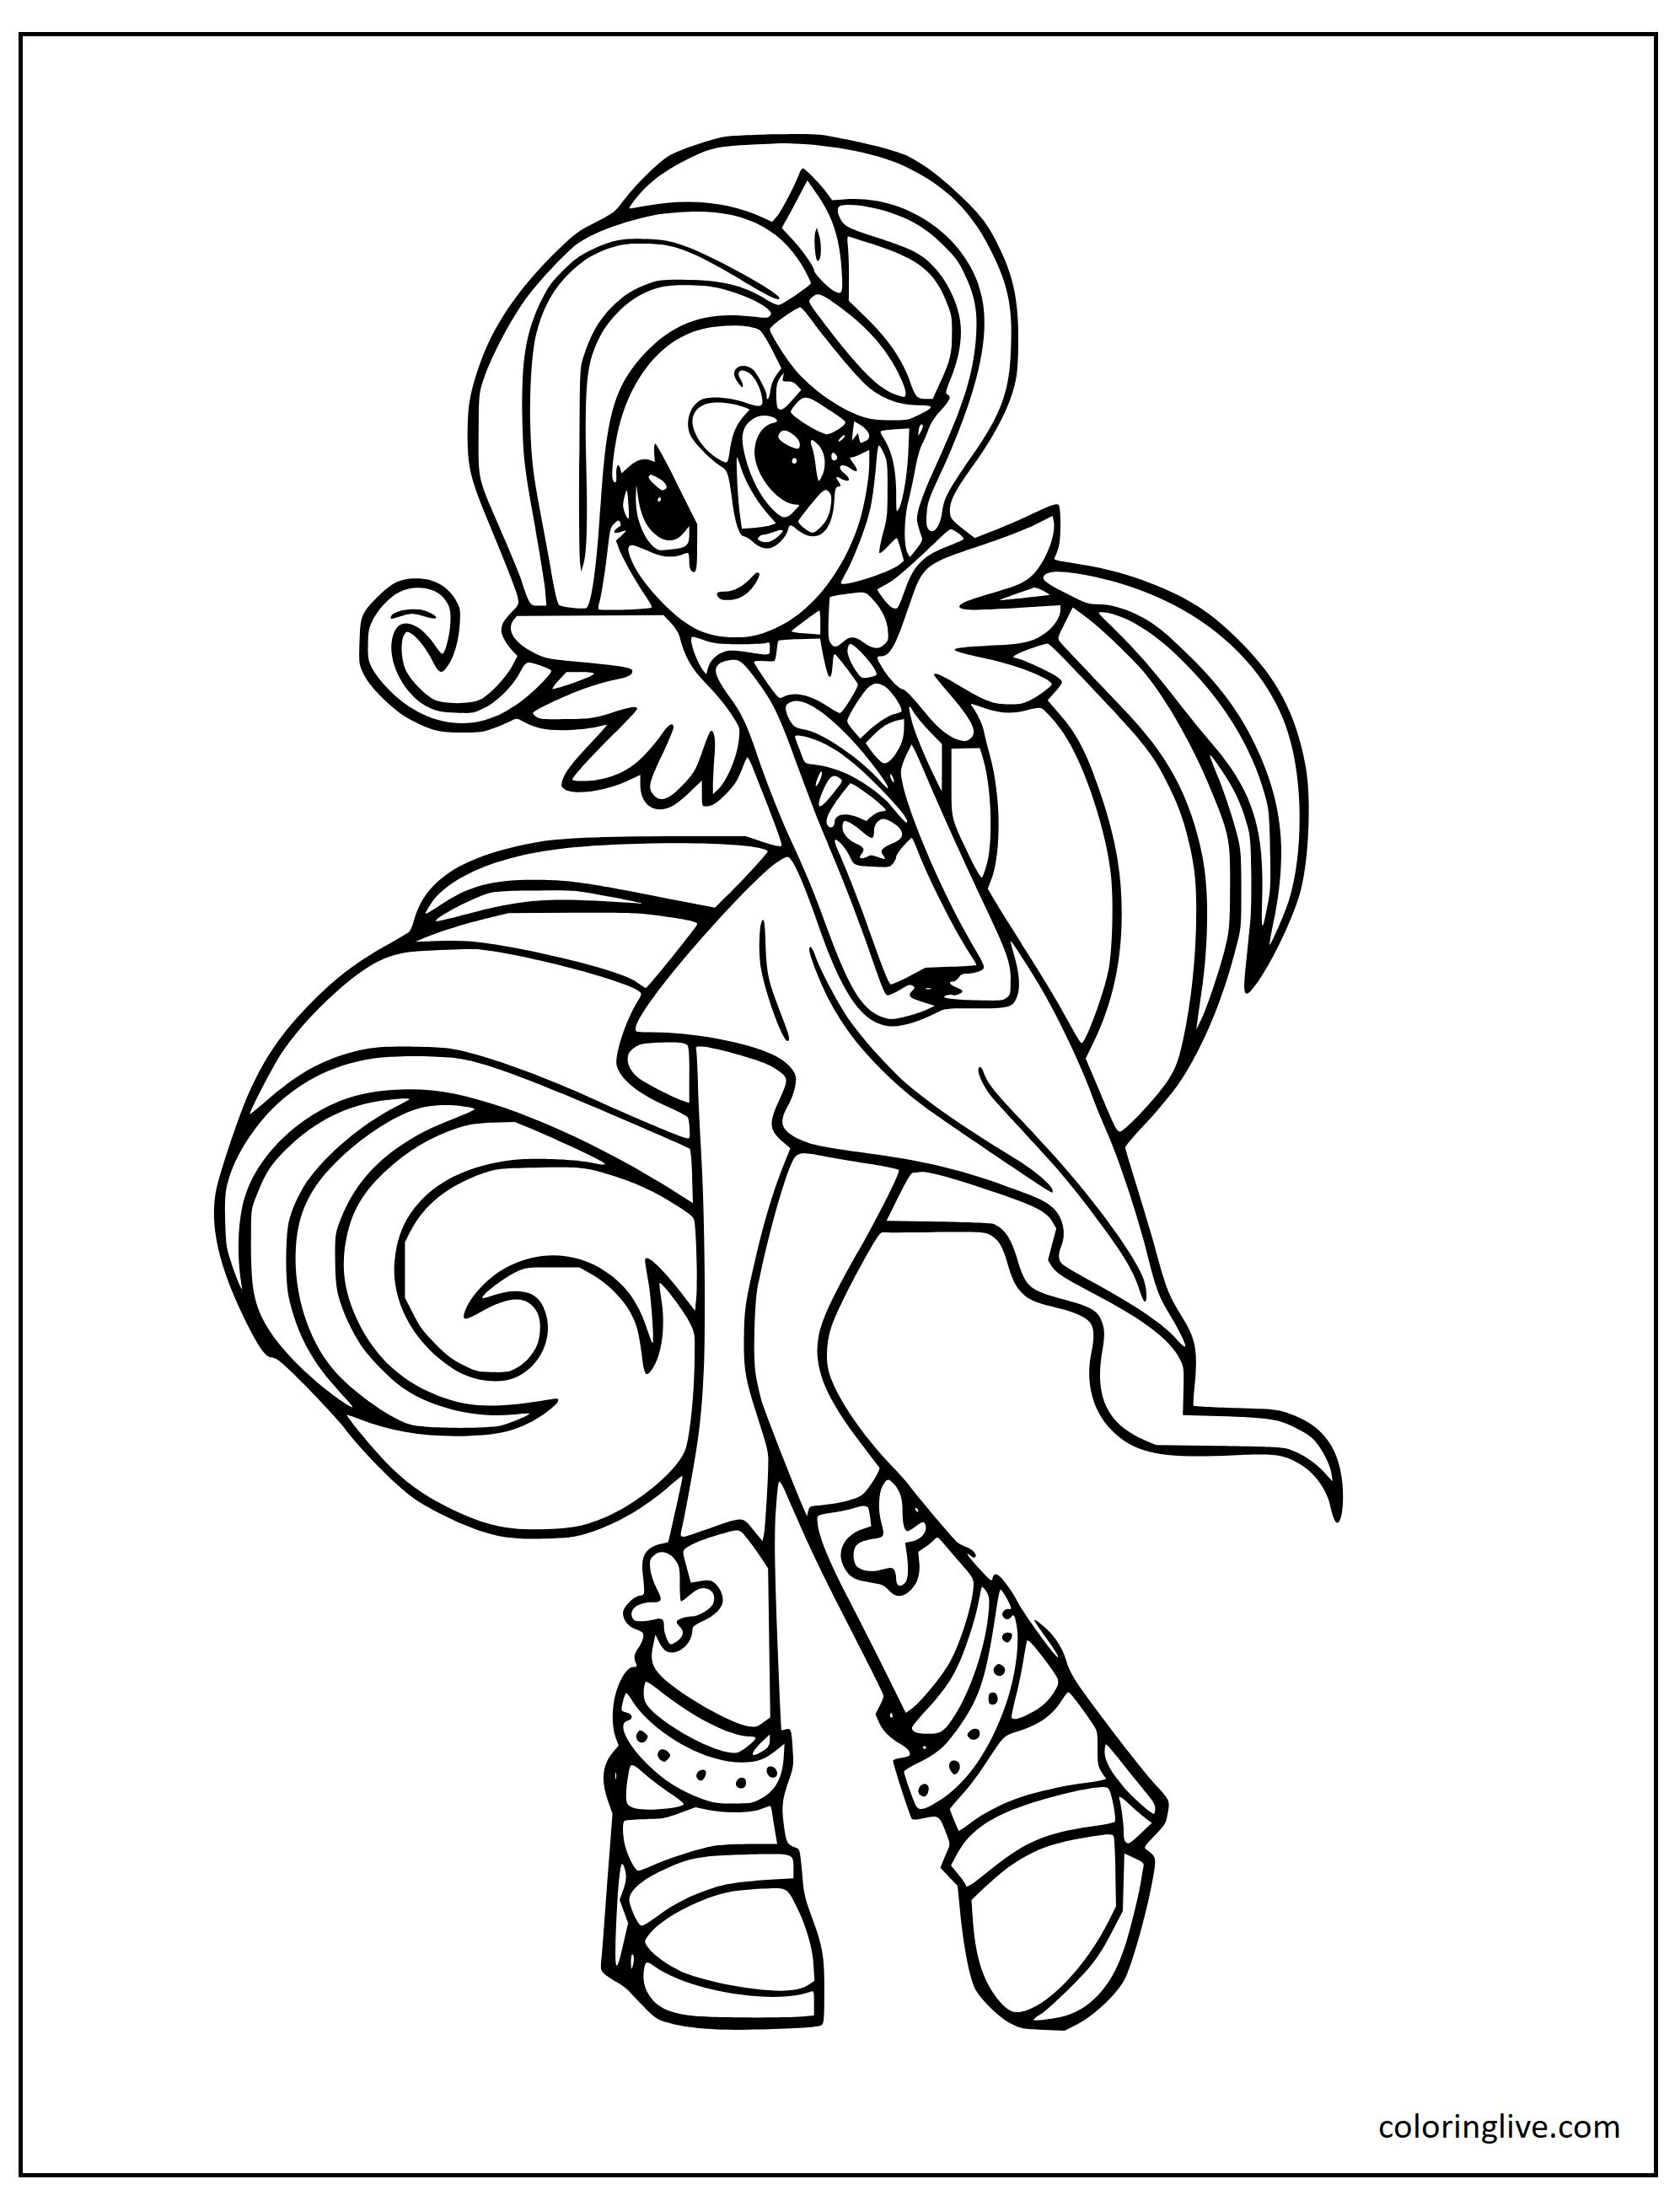 Printable dancing Fluttershy Coloring Page for kids.